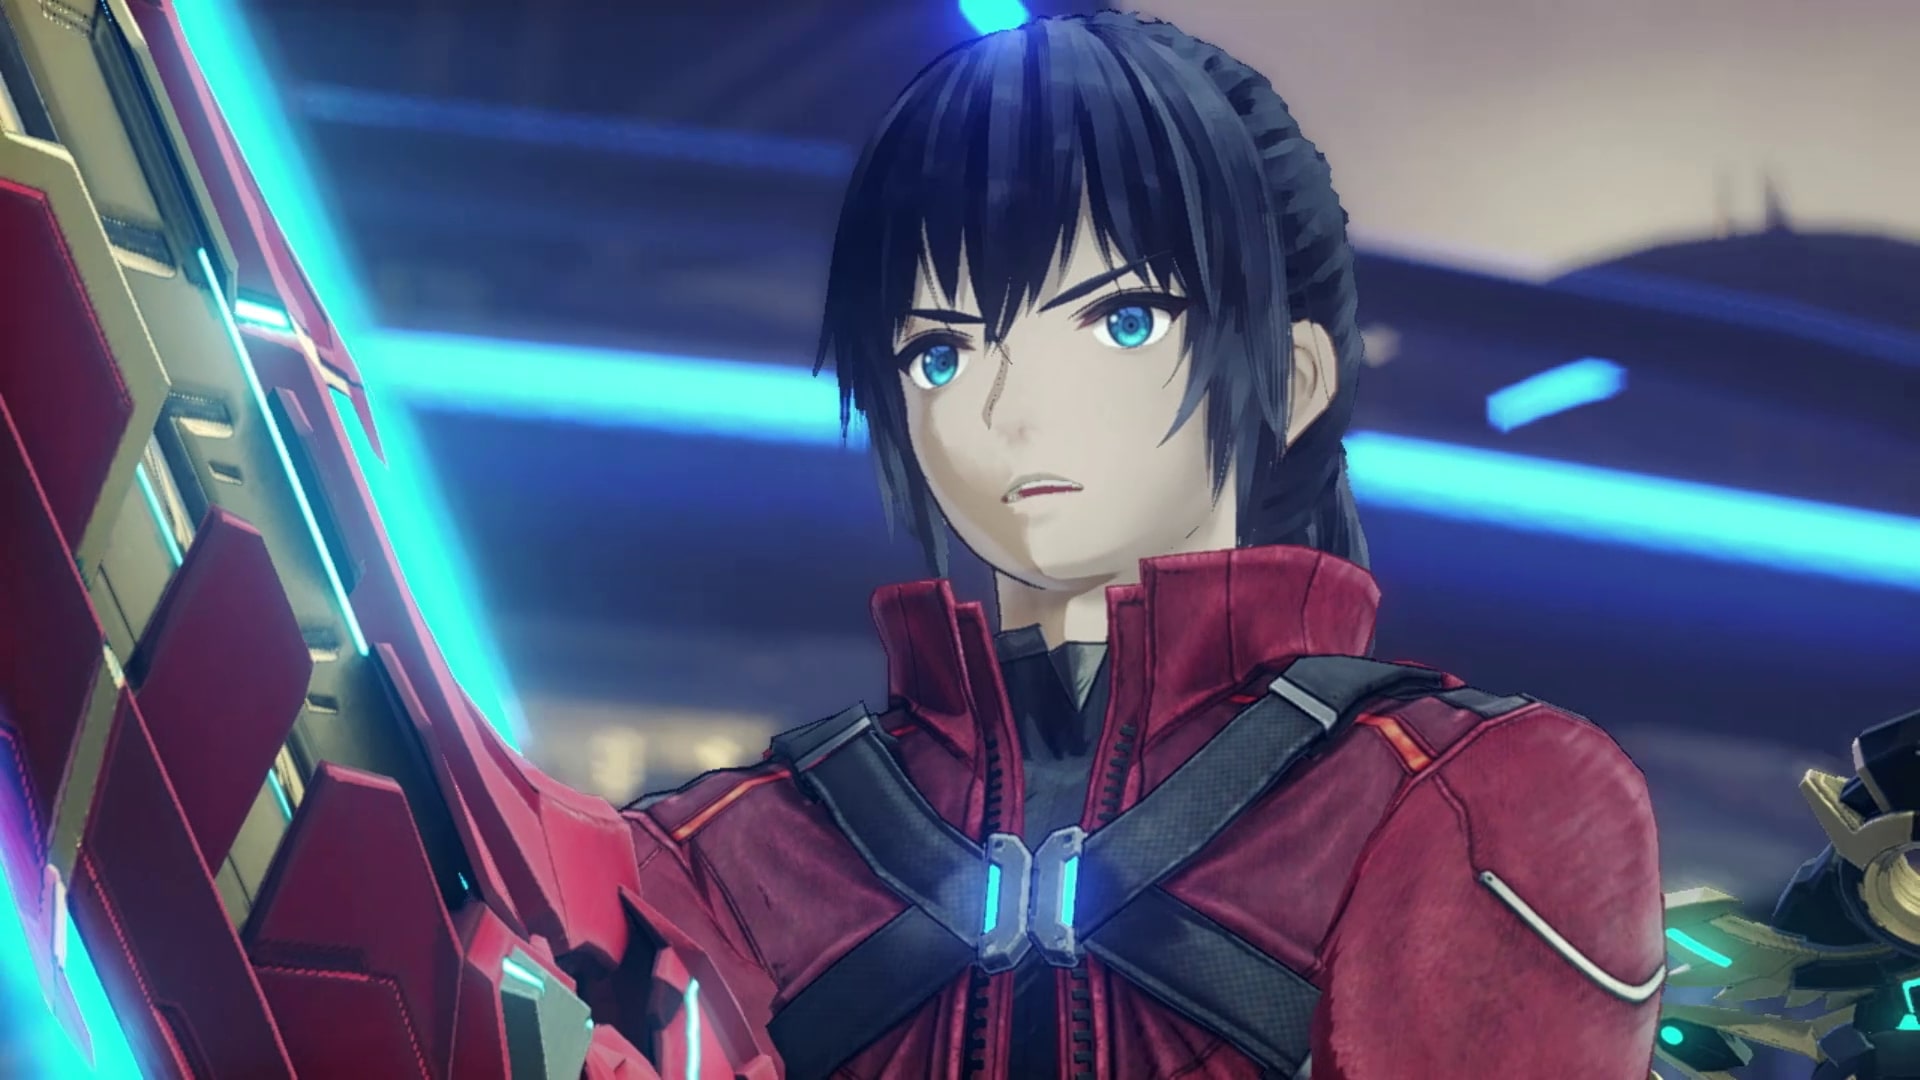 Xenoblade Chronicles 3 Review - The Culmination of A Fantasy Epic -  GamerBraves